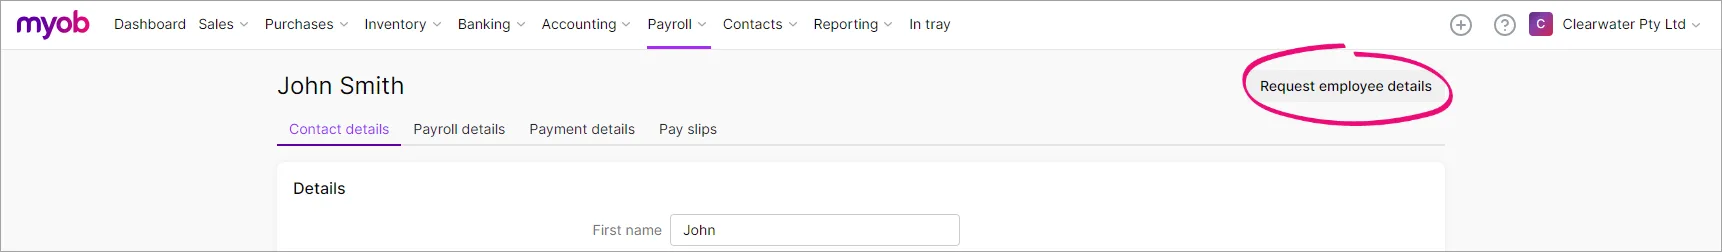 Request employee details button highlighted in an employee record